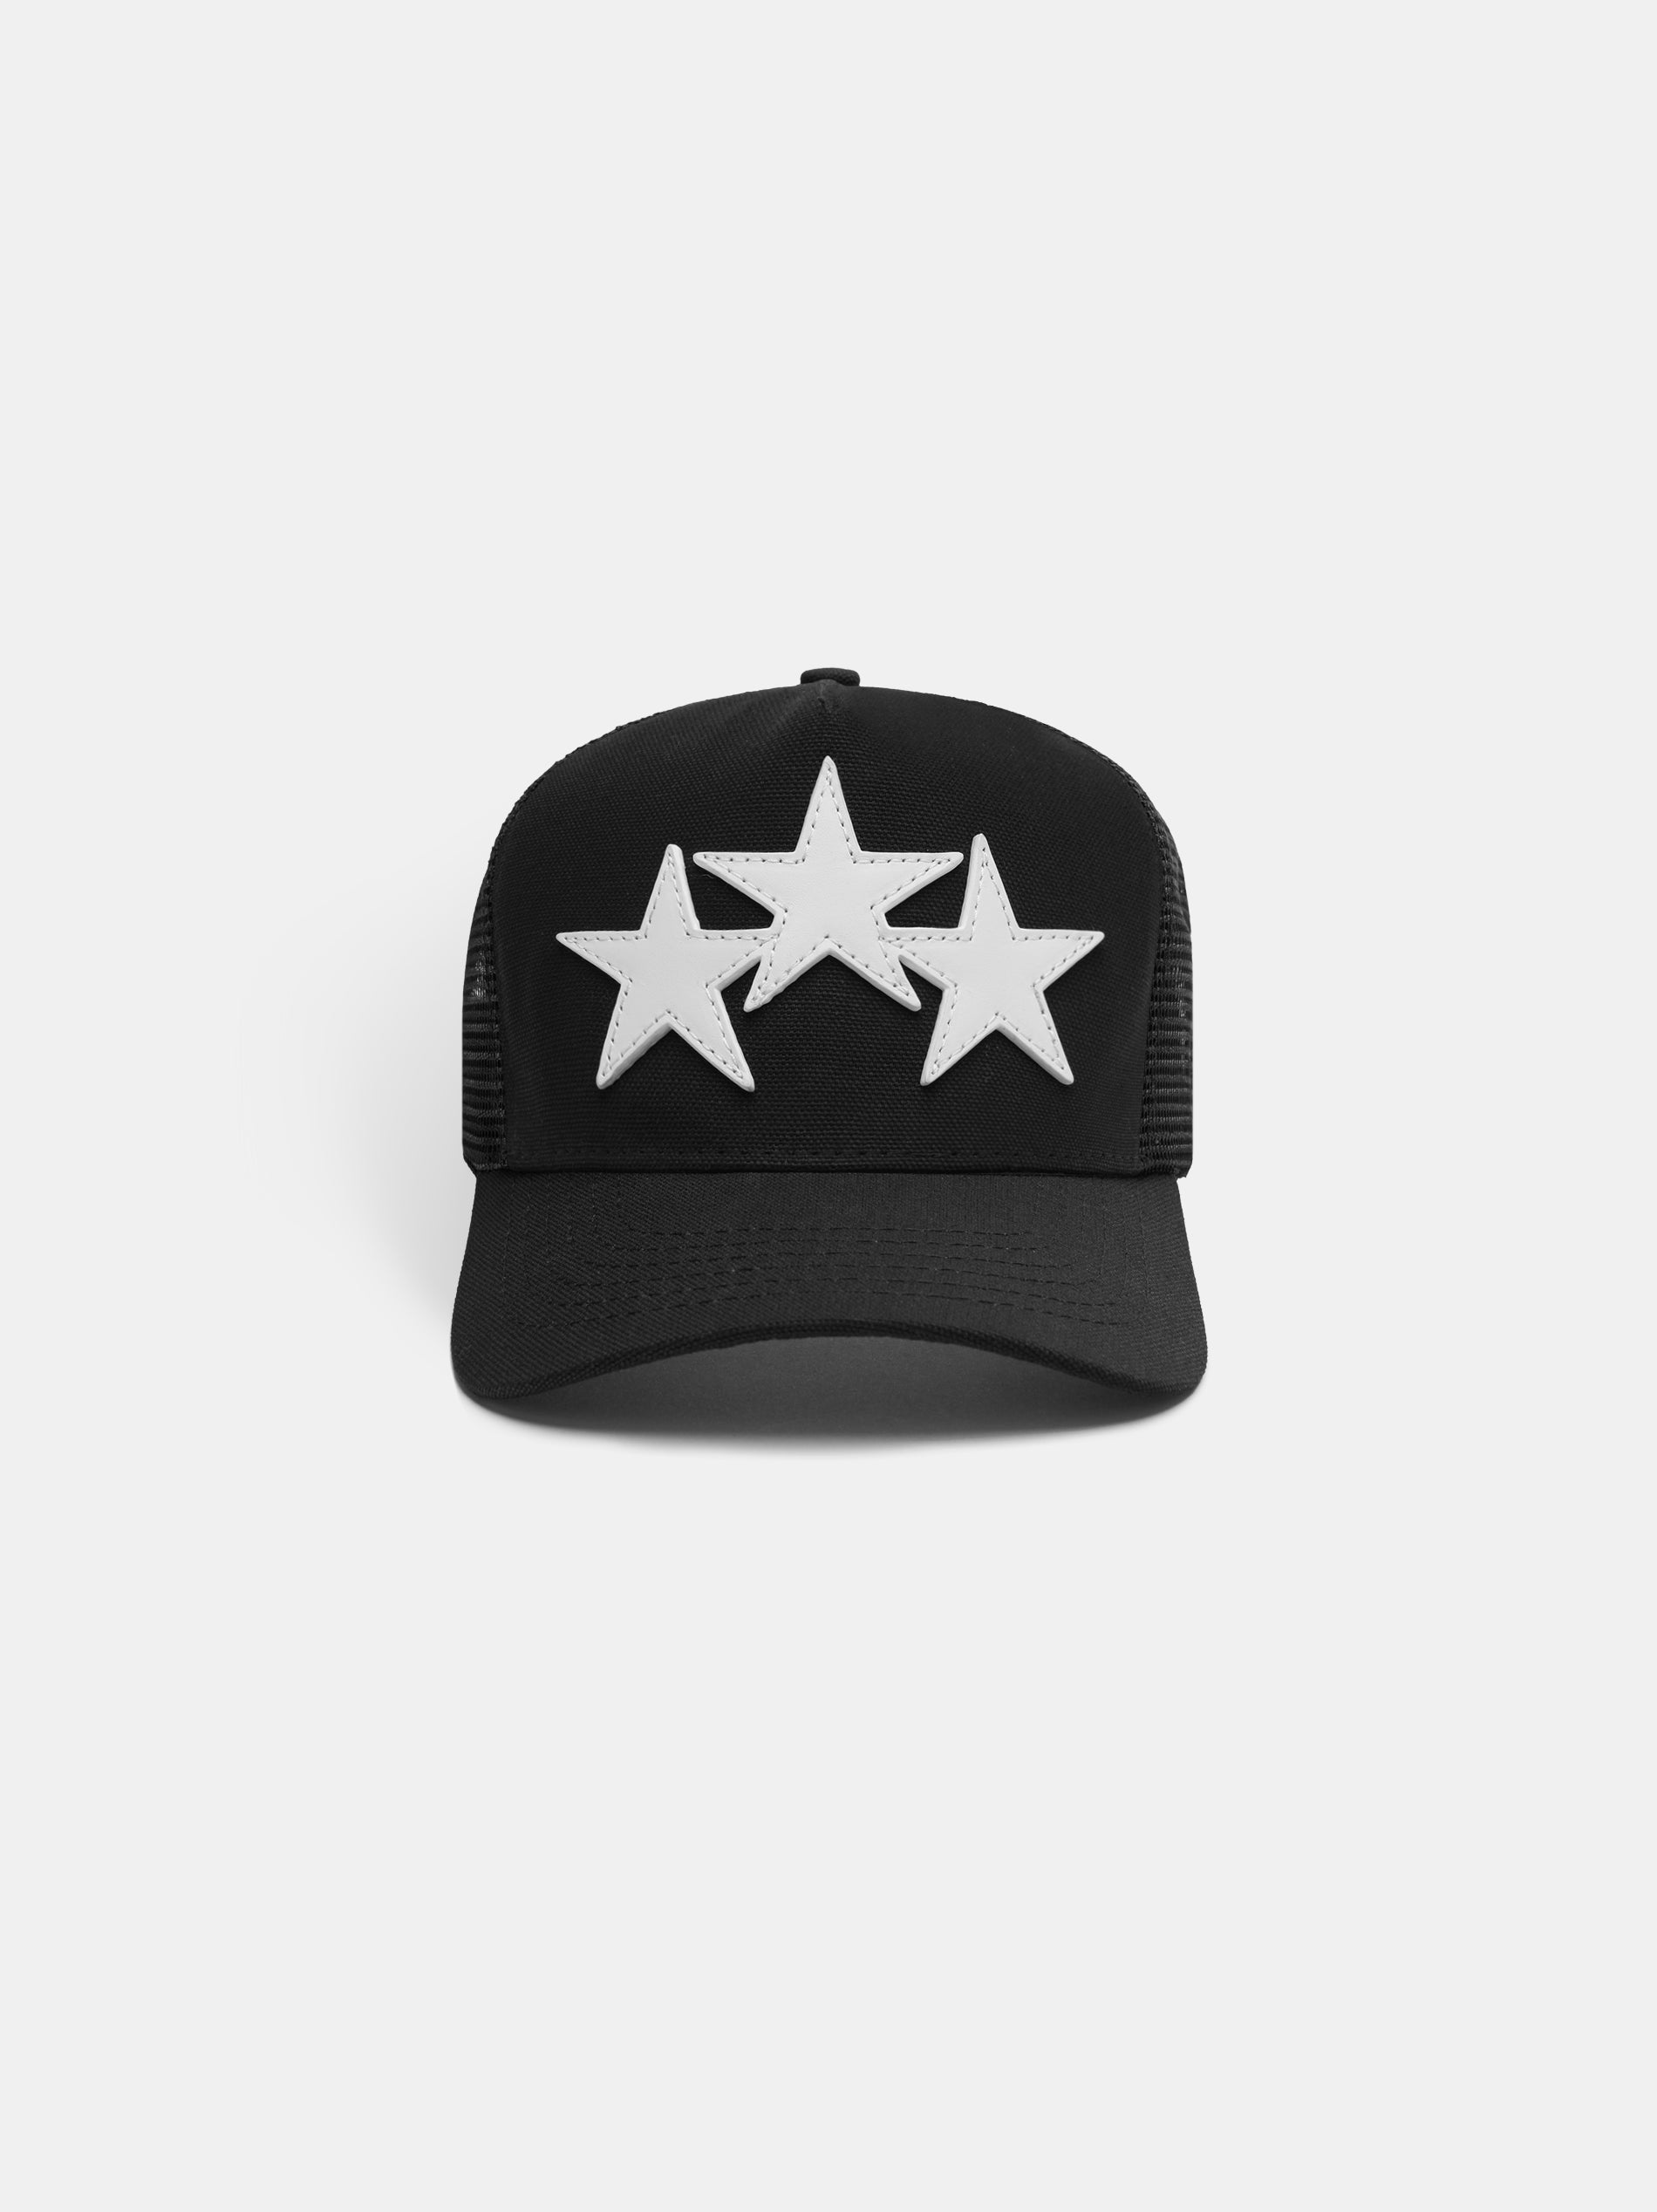 Product 3 Star Trucker Hat - Black/White featured image